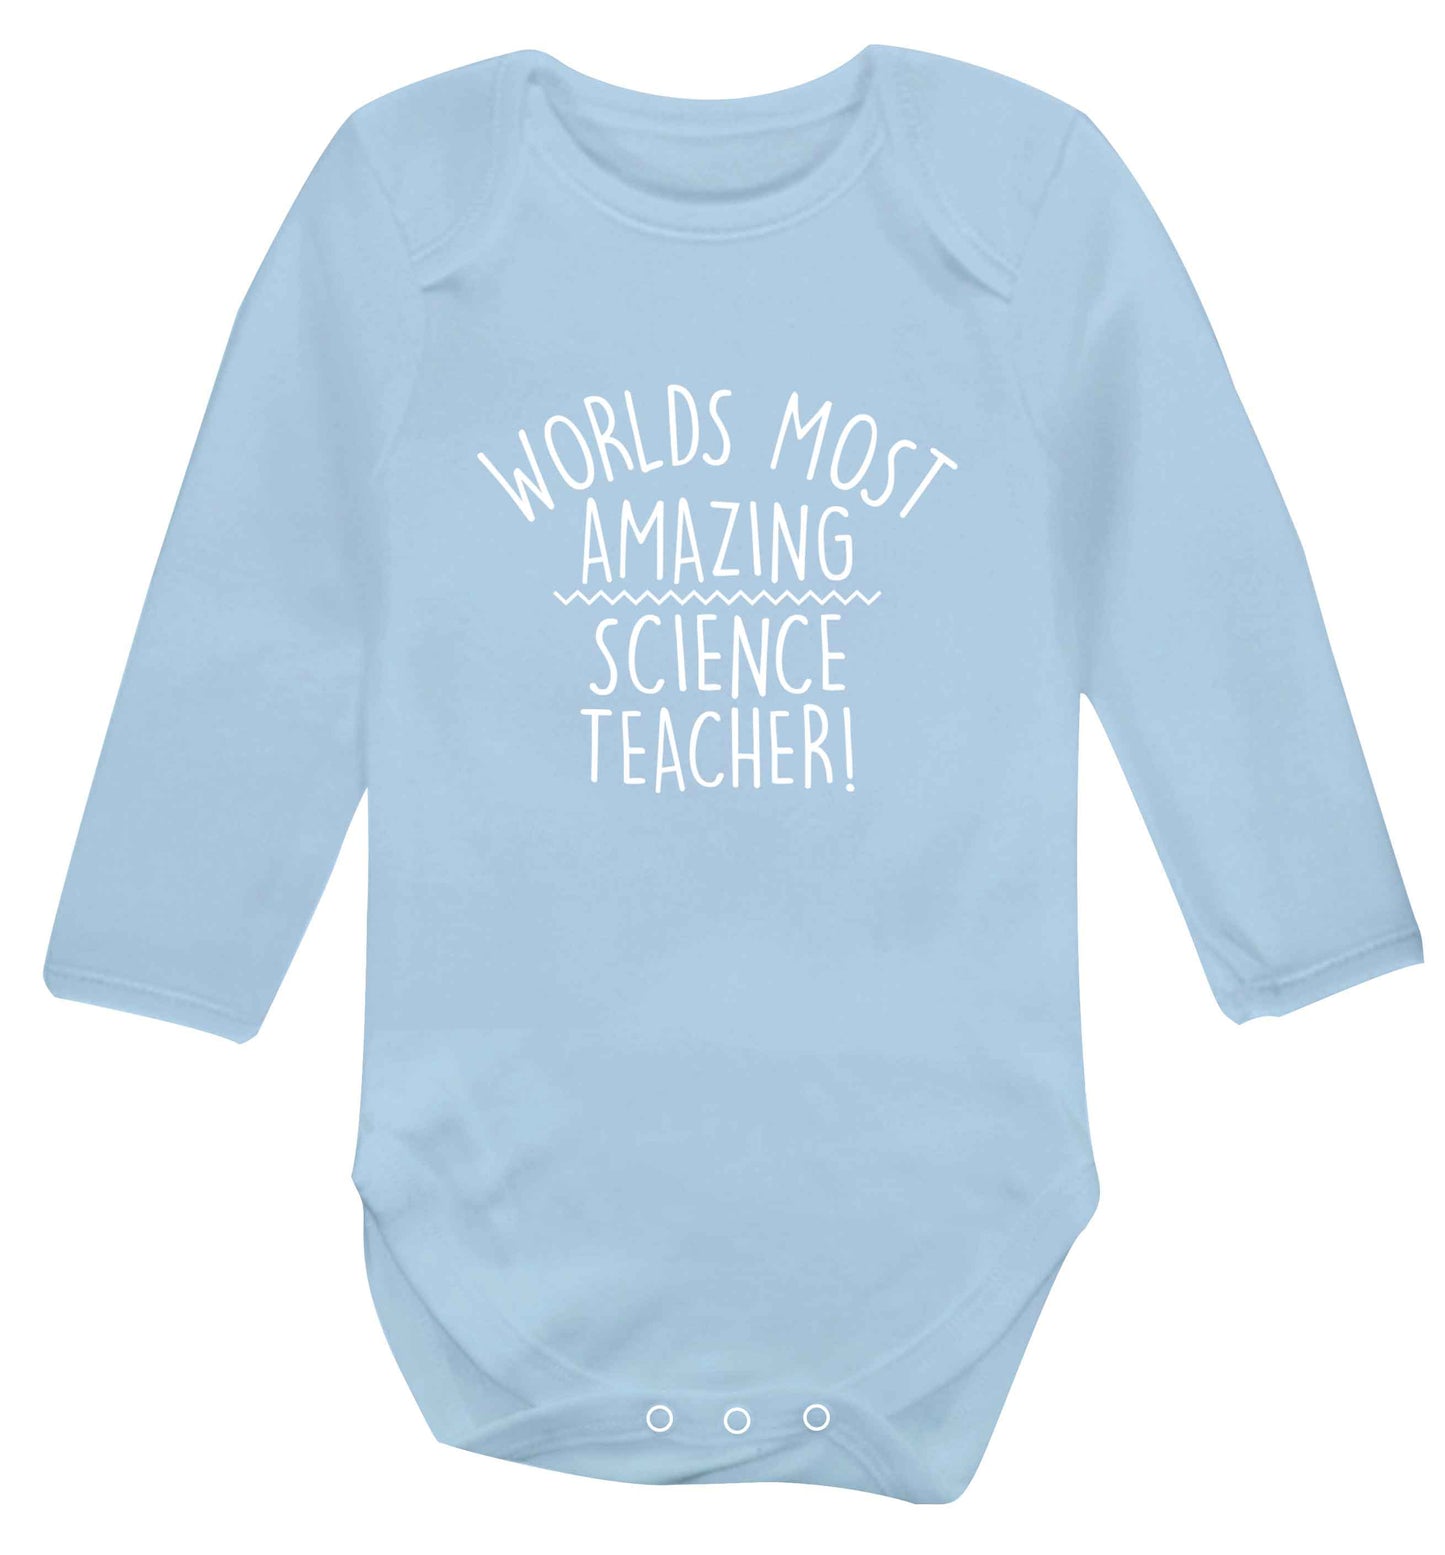 Worlds most amazing science teacher baby vest long sleeved pale blue 6-12 months